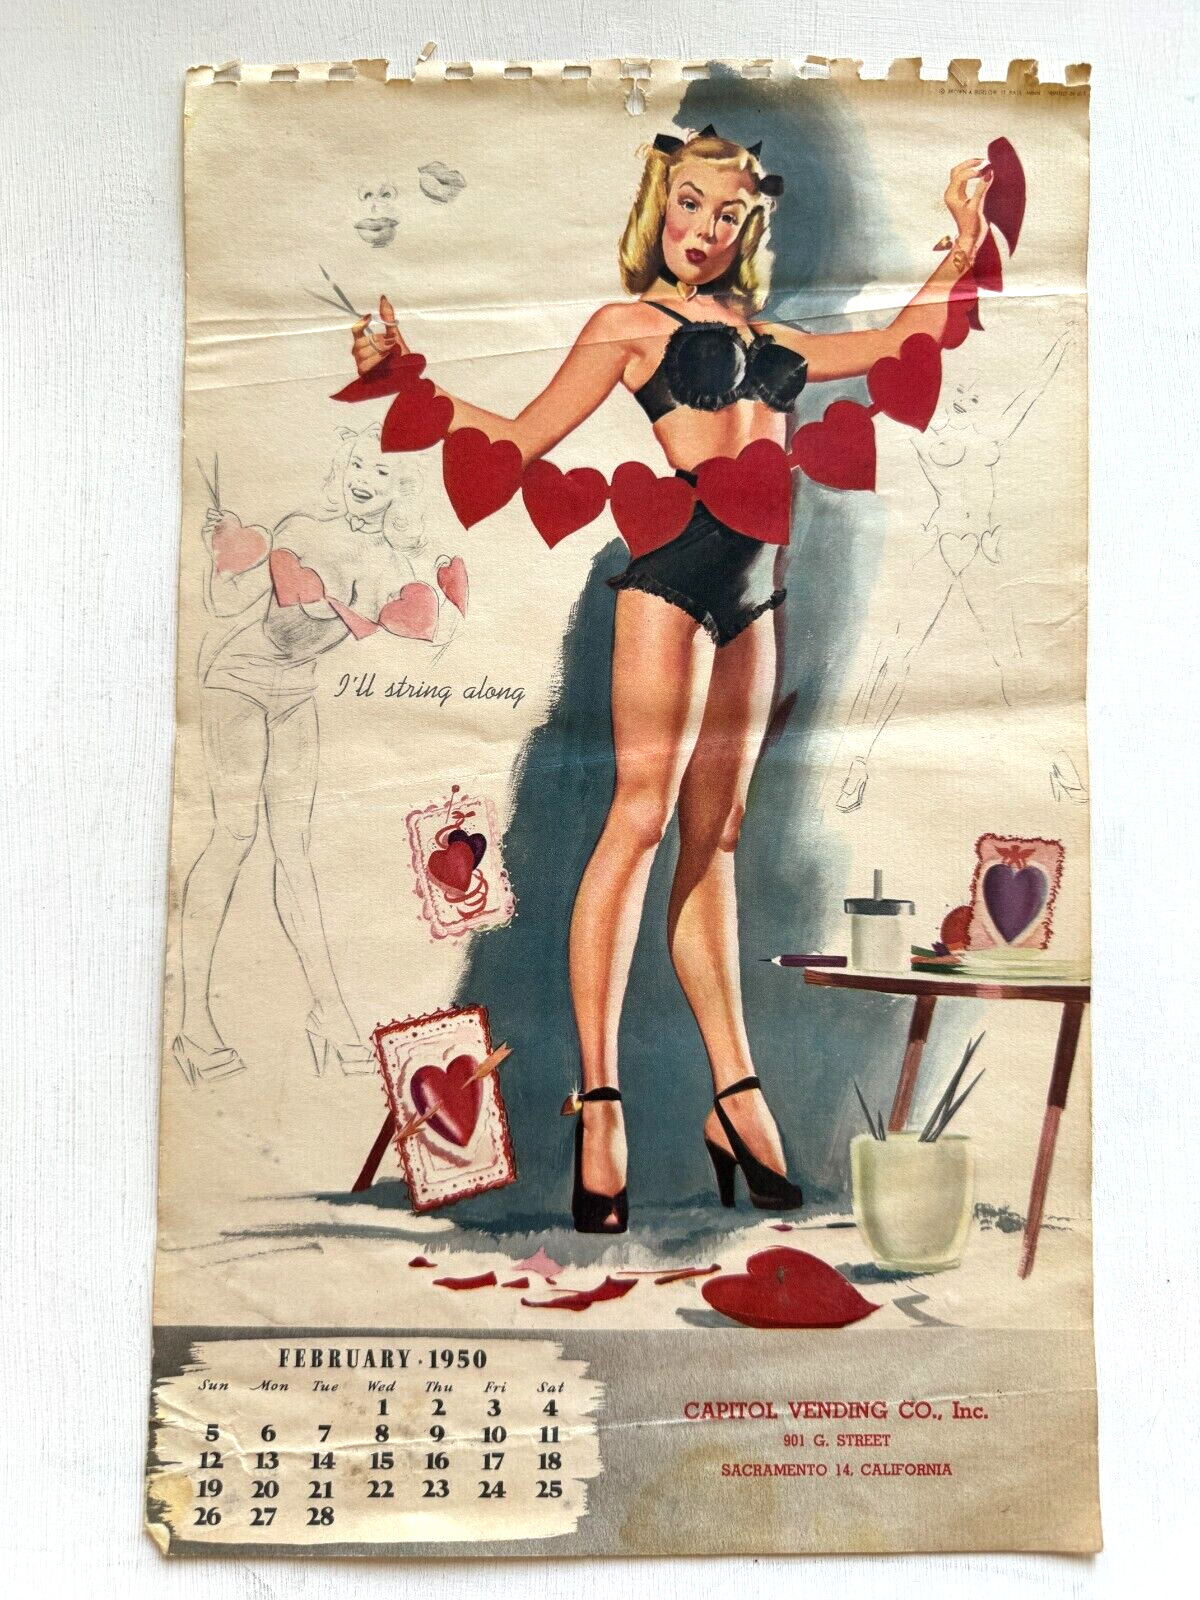 February 1950 Pinup Girl Calendar Page by Elliott- Valentine's Day